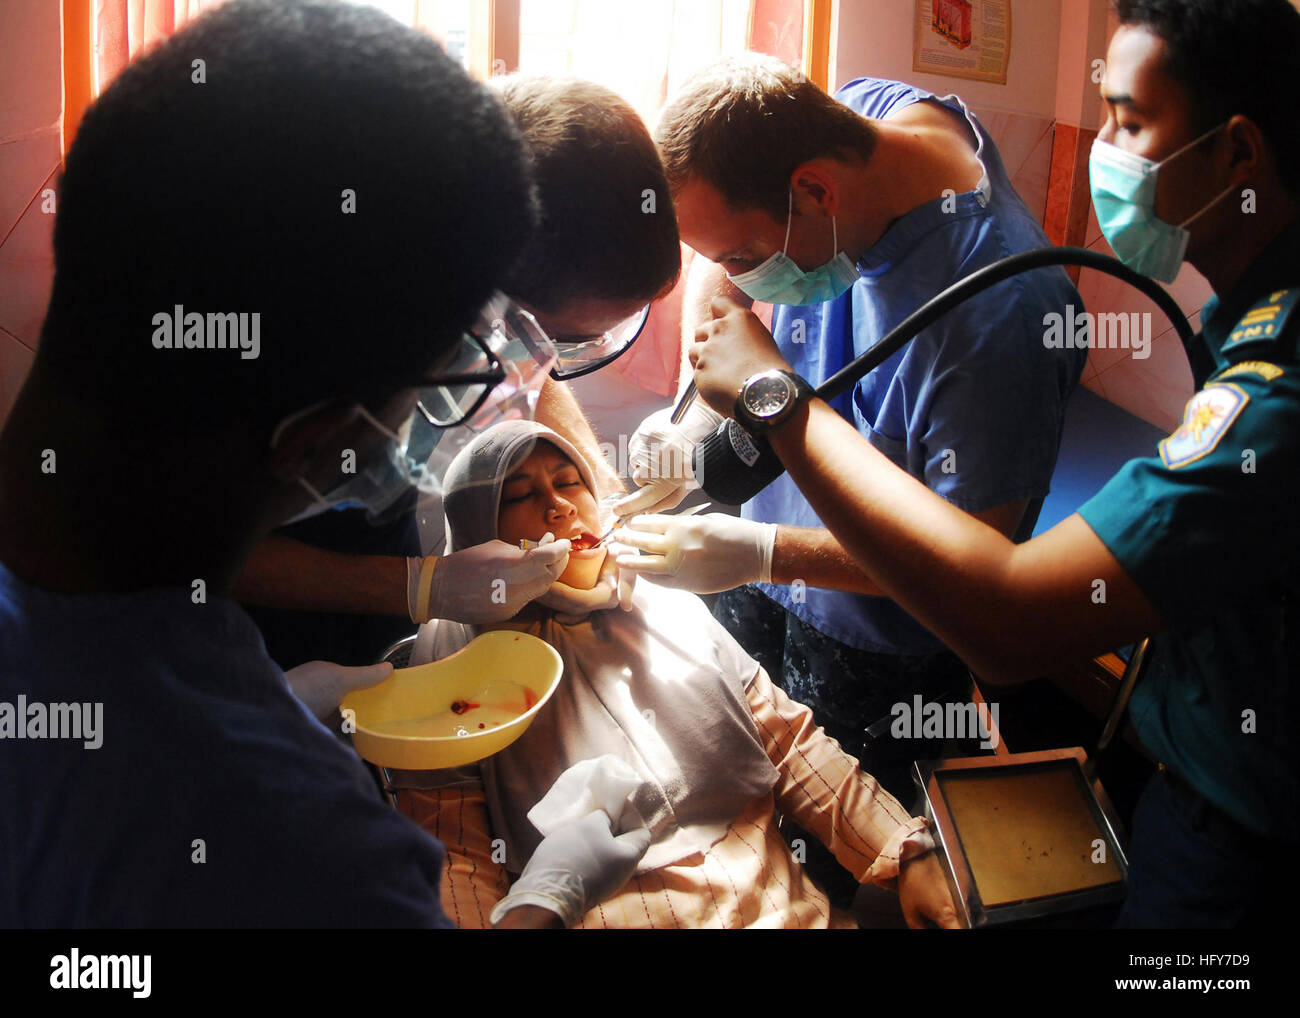 100527-N-0995C-062 WERU VILLAGE, Indonesia (May 27, 2010) U.S. and Indonesian navy dental officers extract a tooth from an Indonesian woman as part of a medical and dental civic action project conducted for Naval Engagement Activity Indonesia 2010. Naval Engagement Activity is part of the Cooperation Afloat Readiness and Training (CARAT) series of bilateral exercises held annually in Southeast Asia to strengthen relationships and enhance force readiness. Naval Engagement Activity is in its 16th year. (U.S. Navy photo by Mass Communication Specialist 2nd Class Eric J. Cutright/Released) US Navy Stock Photo